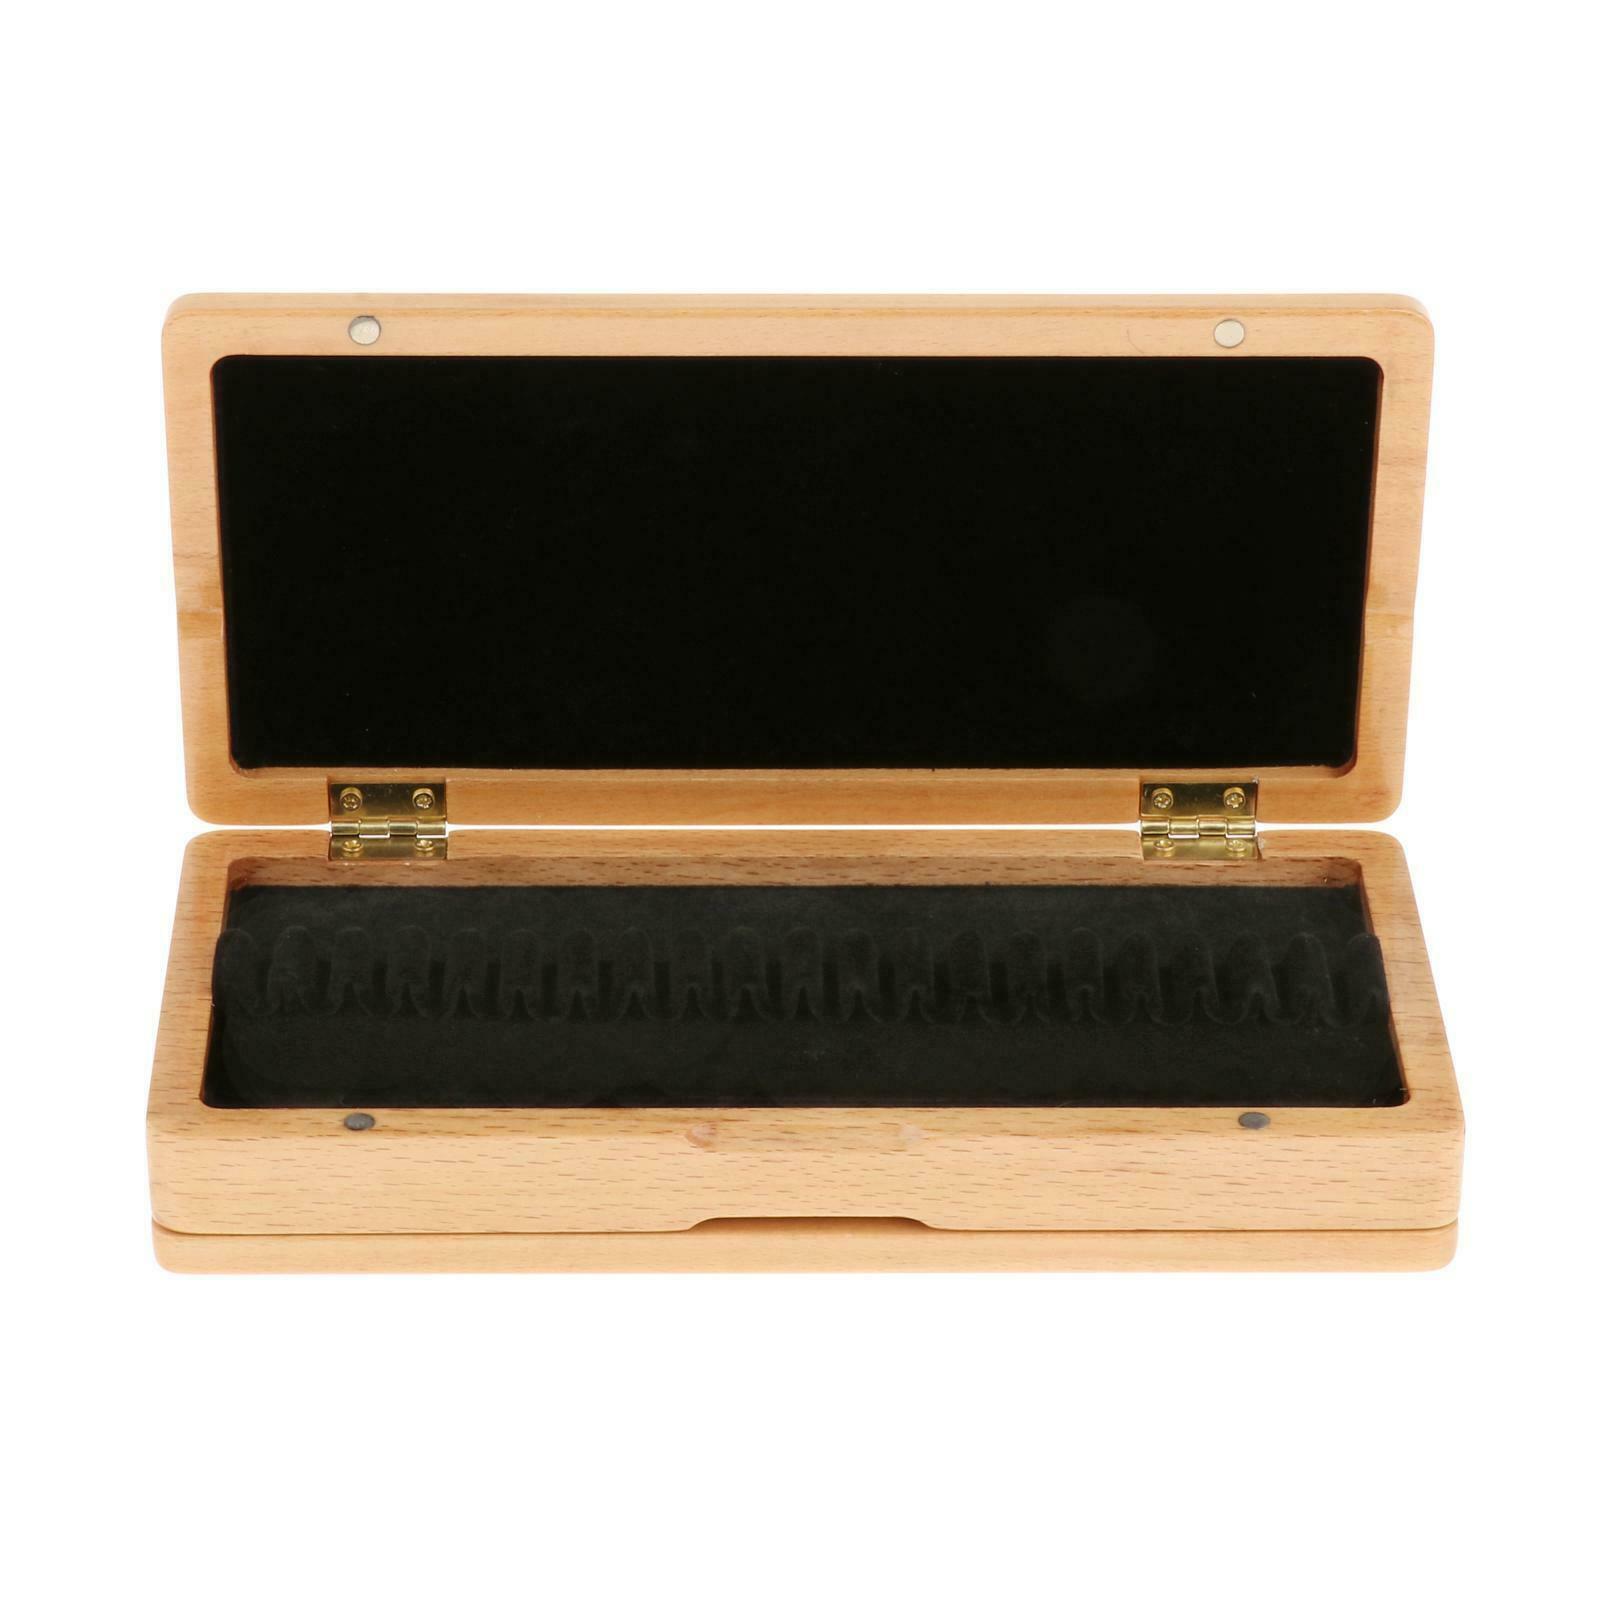 Solid Wood Oboe Reed Case Wooden Holder for Oboe Store 40 Reeds 20x9.3x3.7cm